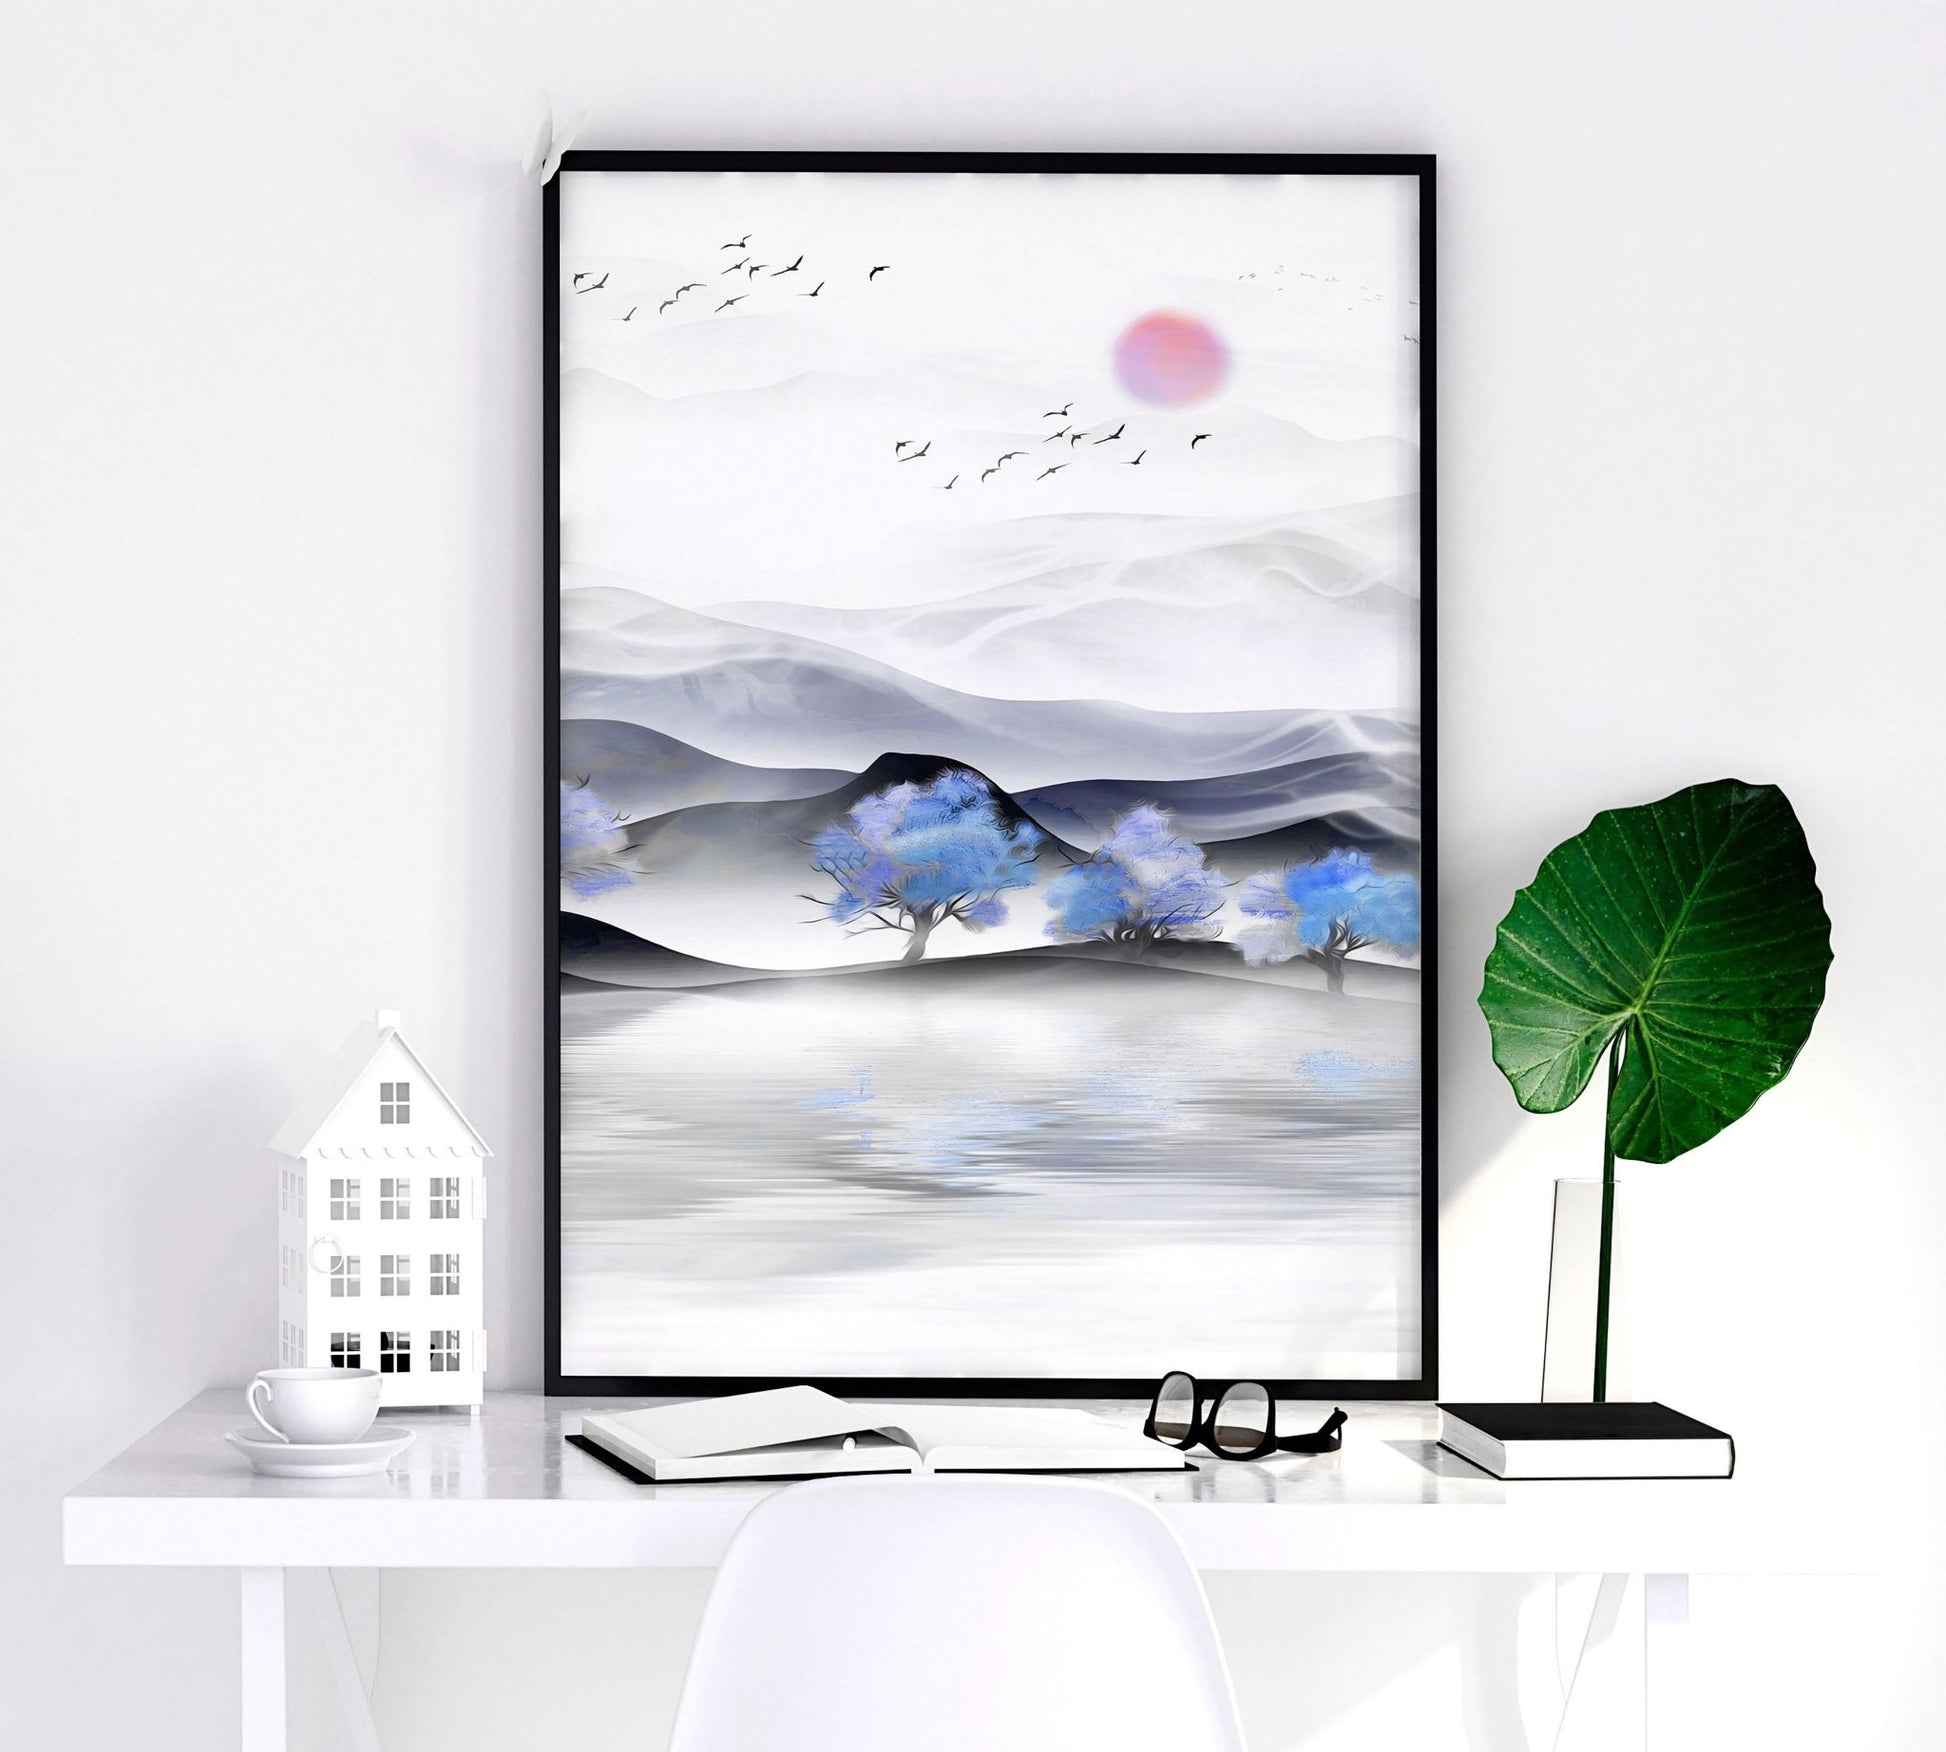 Japandi design for Living room | set of 3 wall art prints - About Wall Art